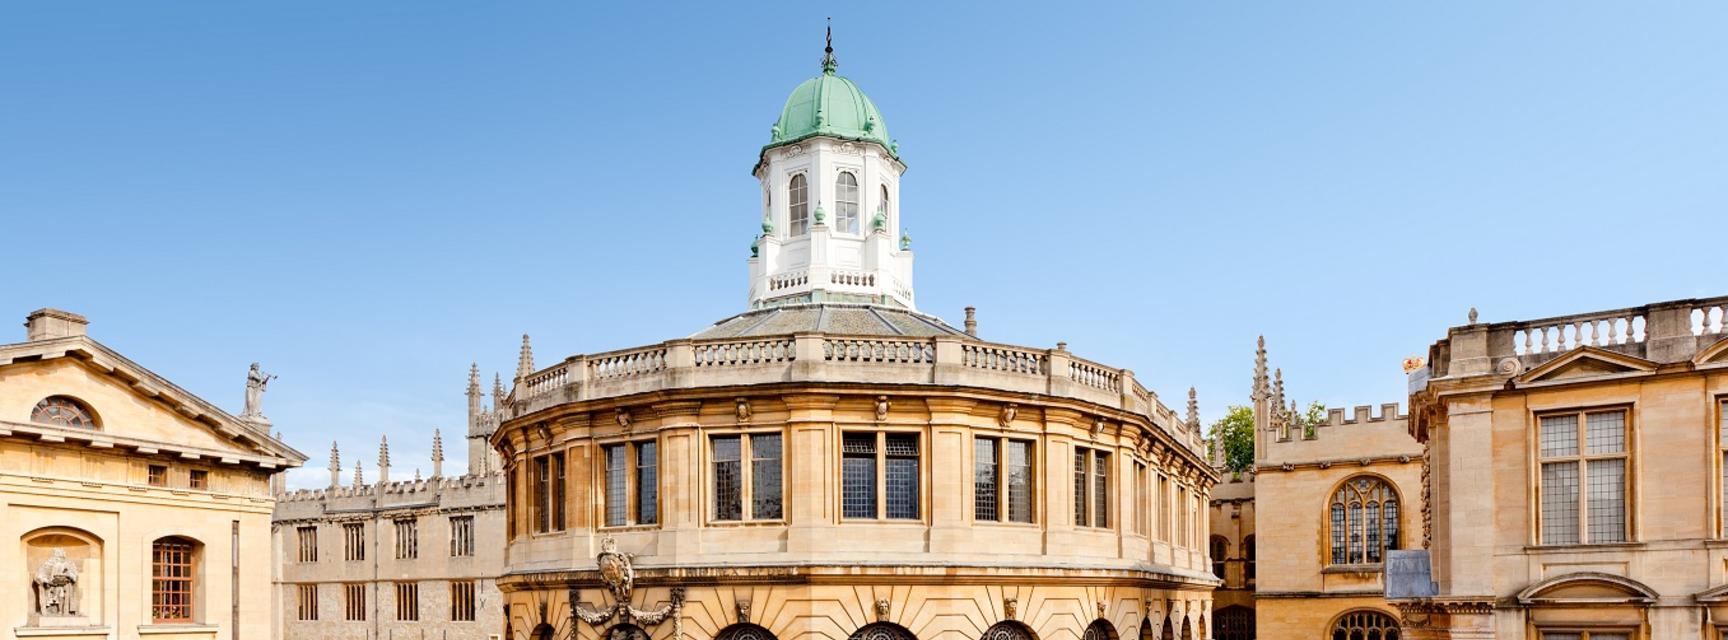 External photo of Sheldonian Theatre on a bright, sunny day